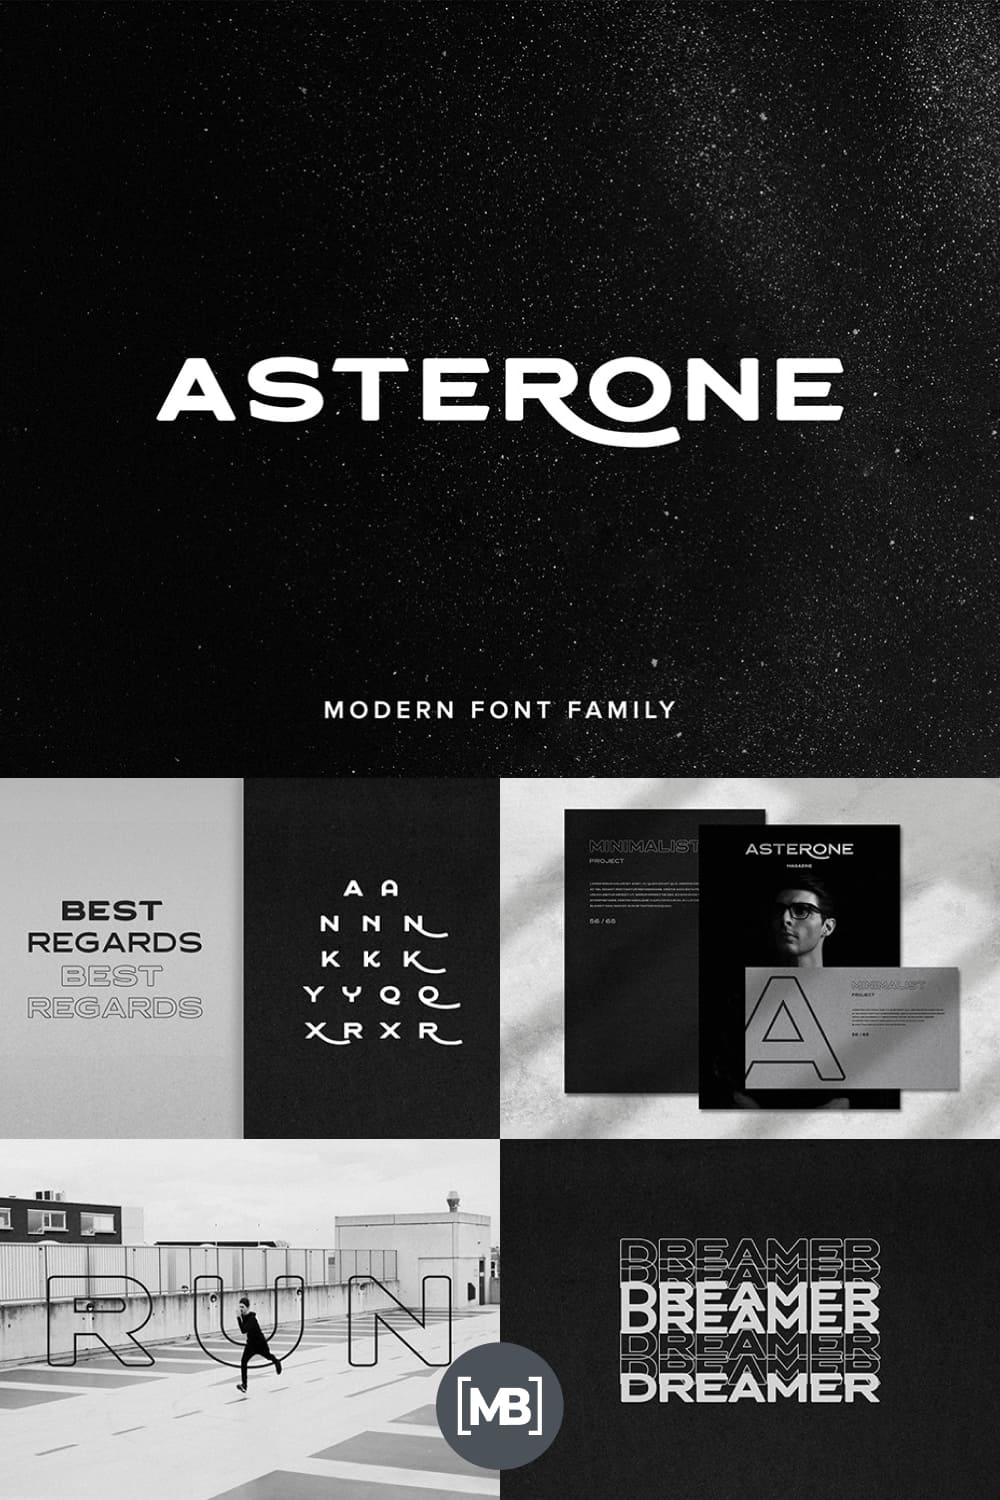 Stylish and modern font. It is urban and minimalistic.